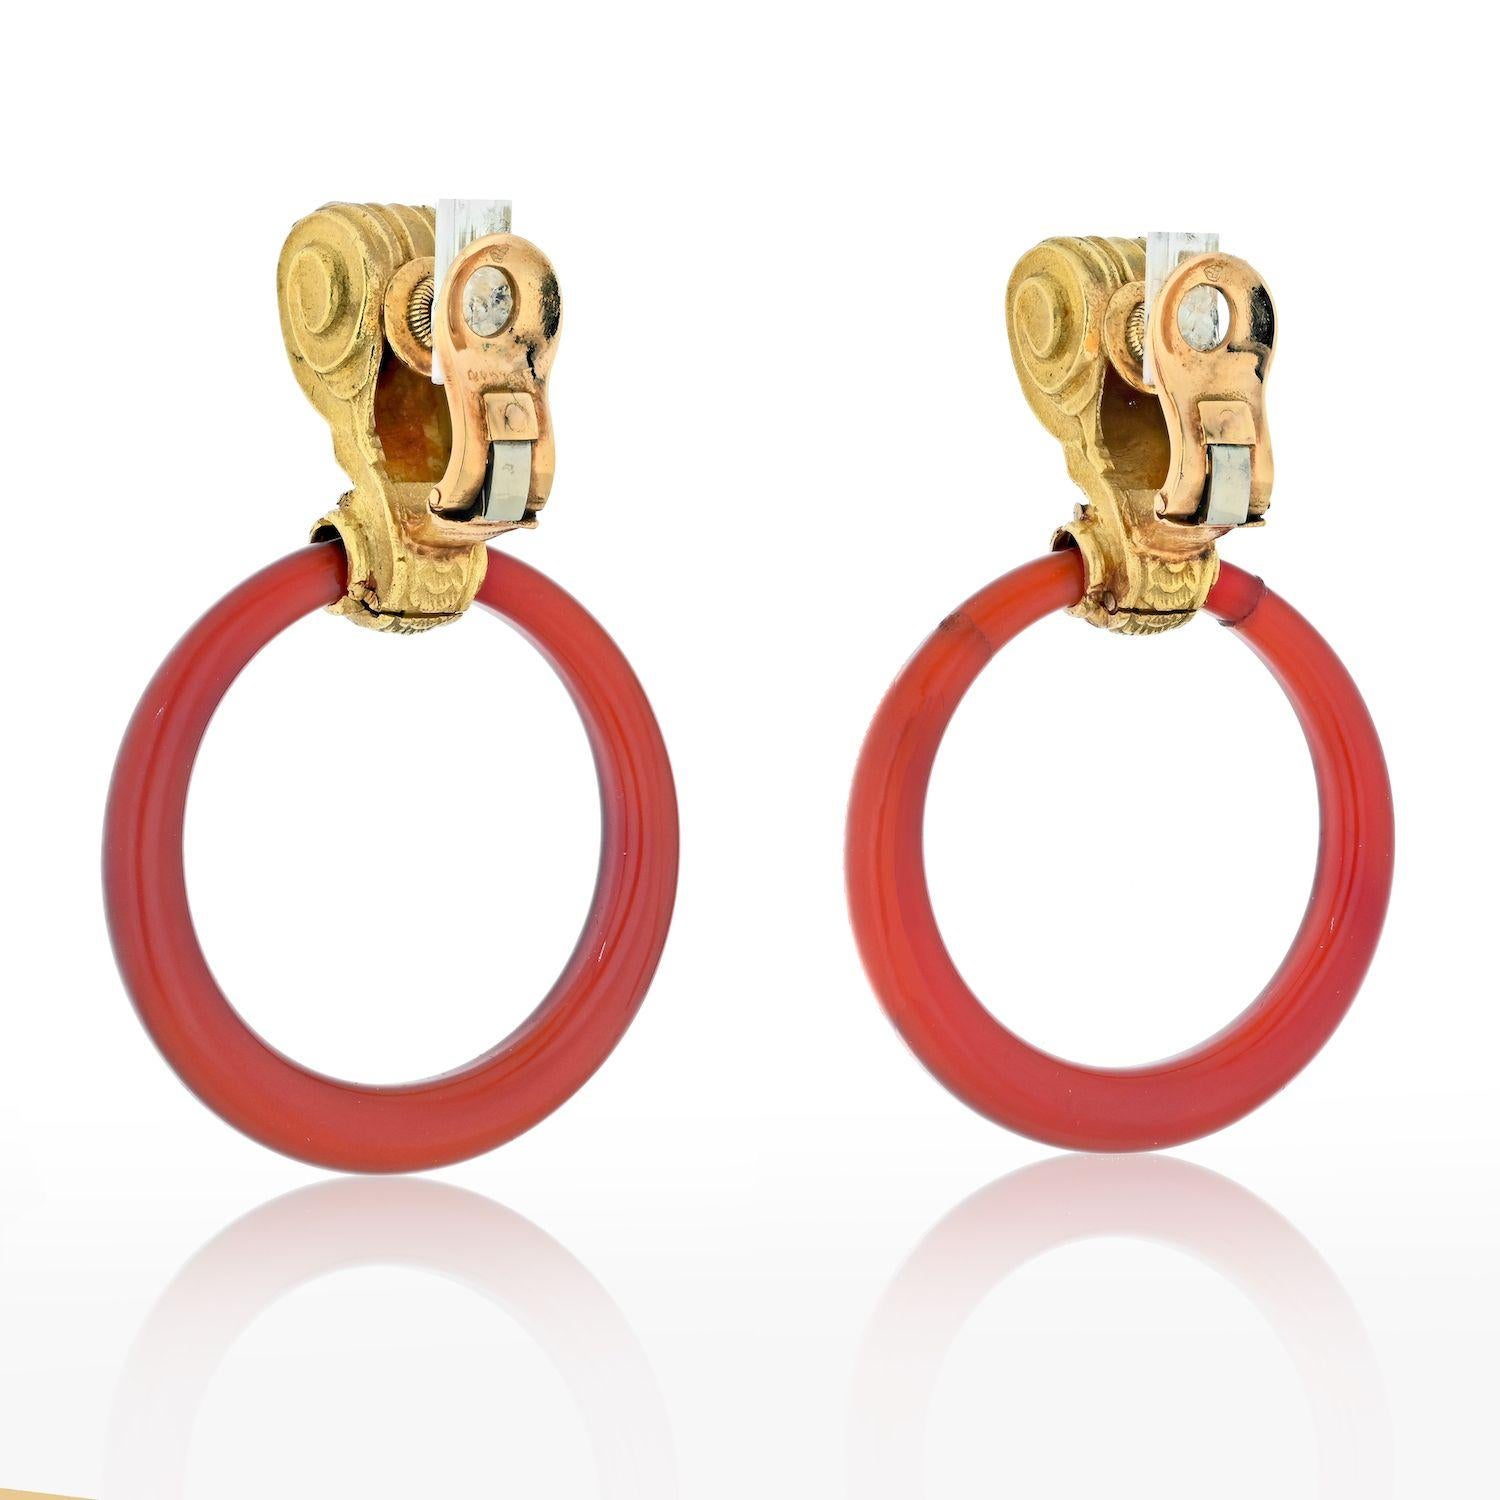 Of door knocker design, in articulated 18K yellow gold, with clip backs these are vintage Bvlgari door knockers with hoops made of Carnelian. 
Because these earrings come to us from 1970's there are some signs of wear on one of the carnelian hoops.